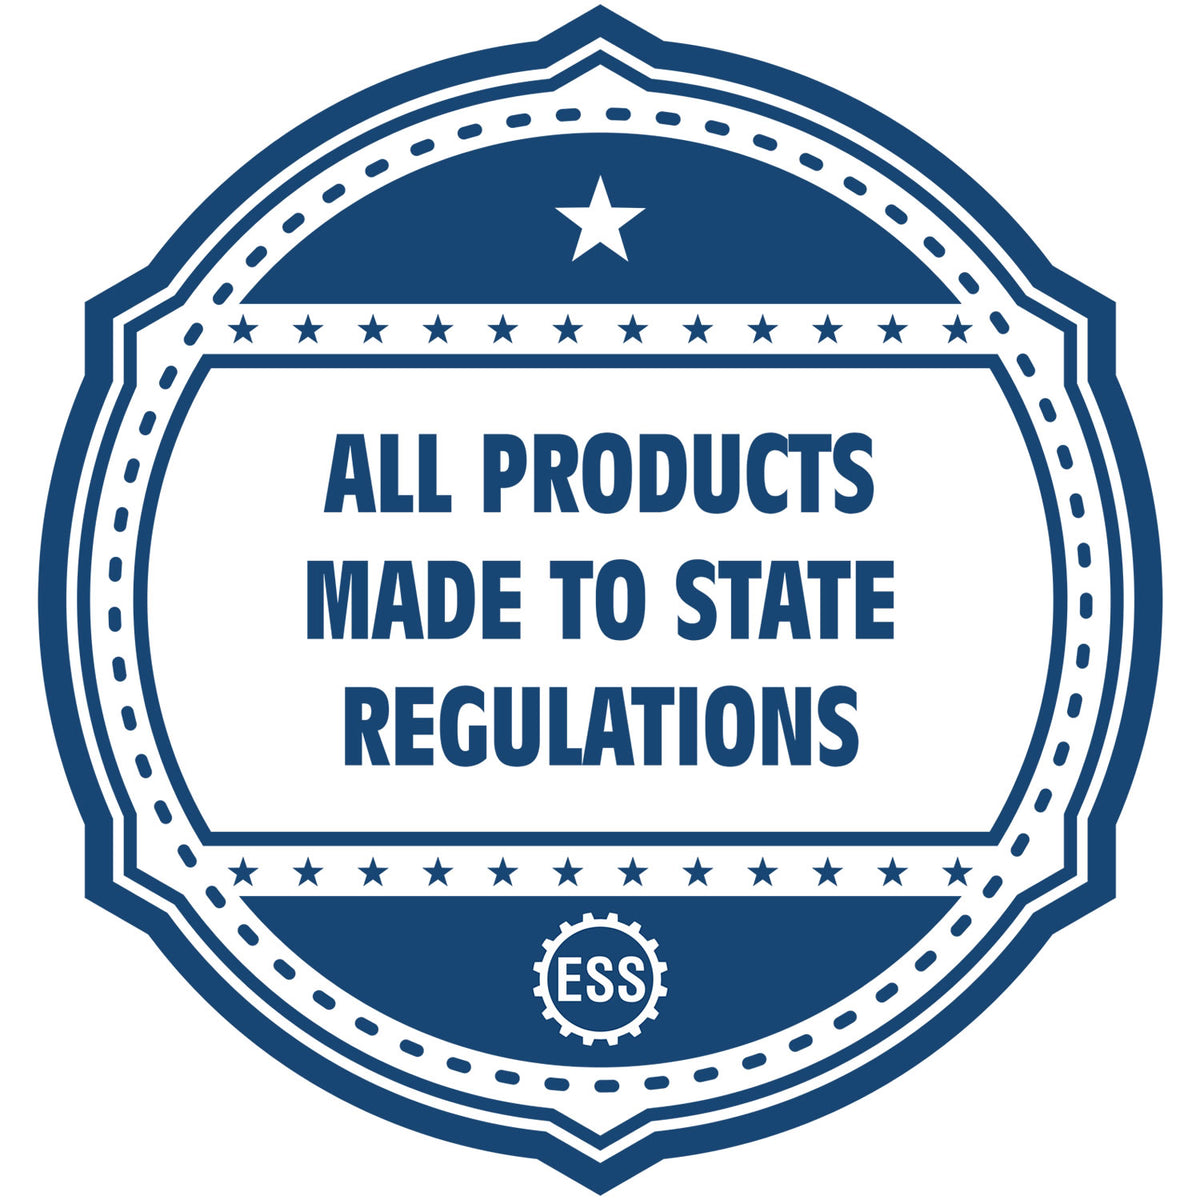 An icon or badge element for the Soft Pocket Montana Landscape Architect Embosser showing that this product is made in compliance with state regulations.